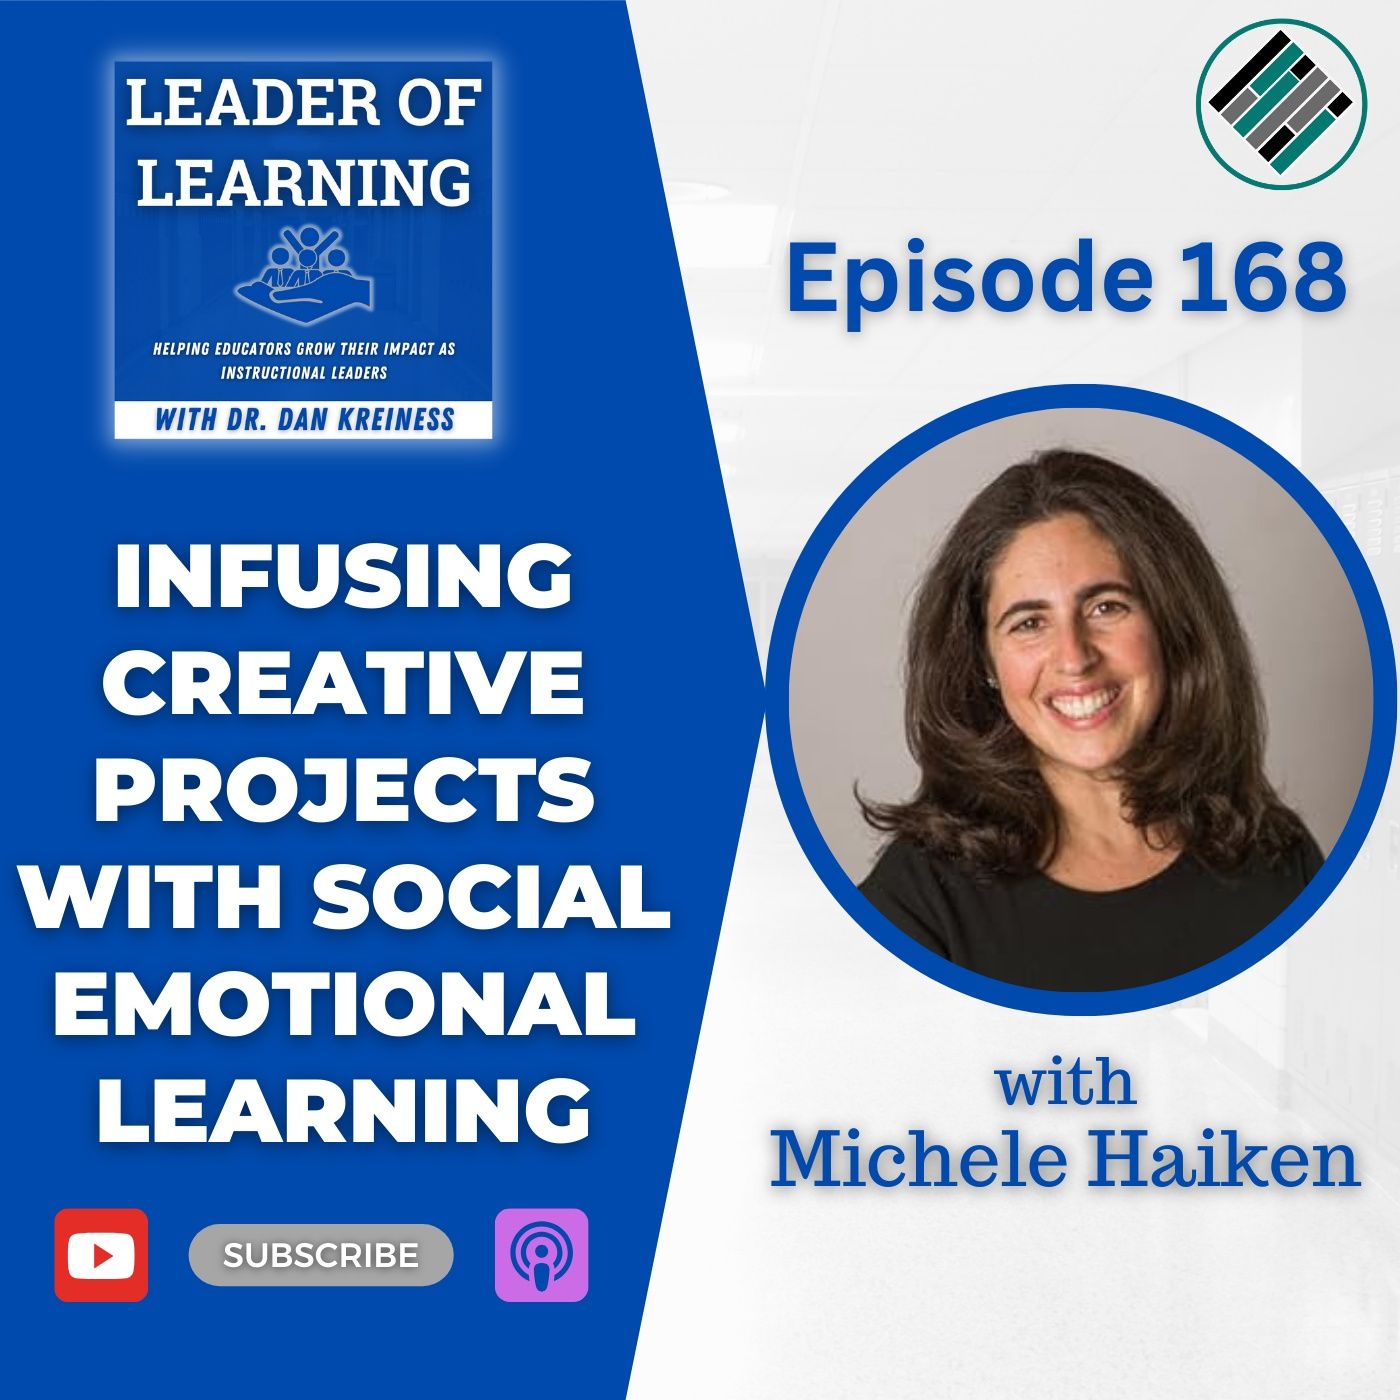 Infusing Creative Projects with Social Emotional Learning with Michele Haiken